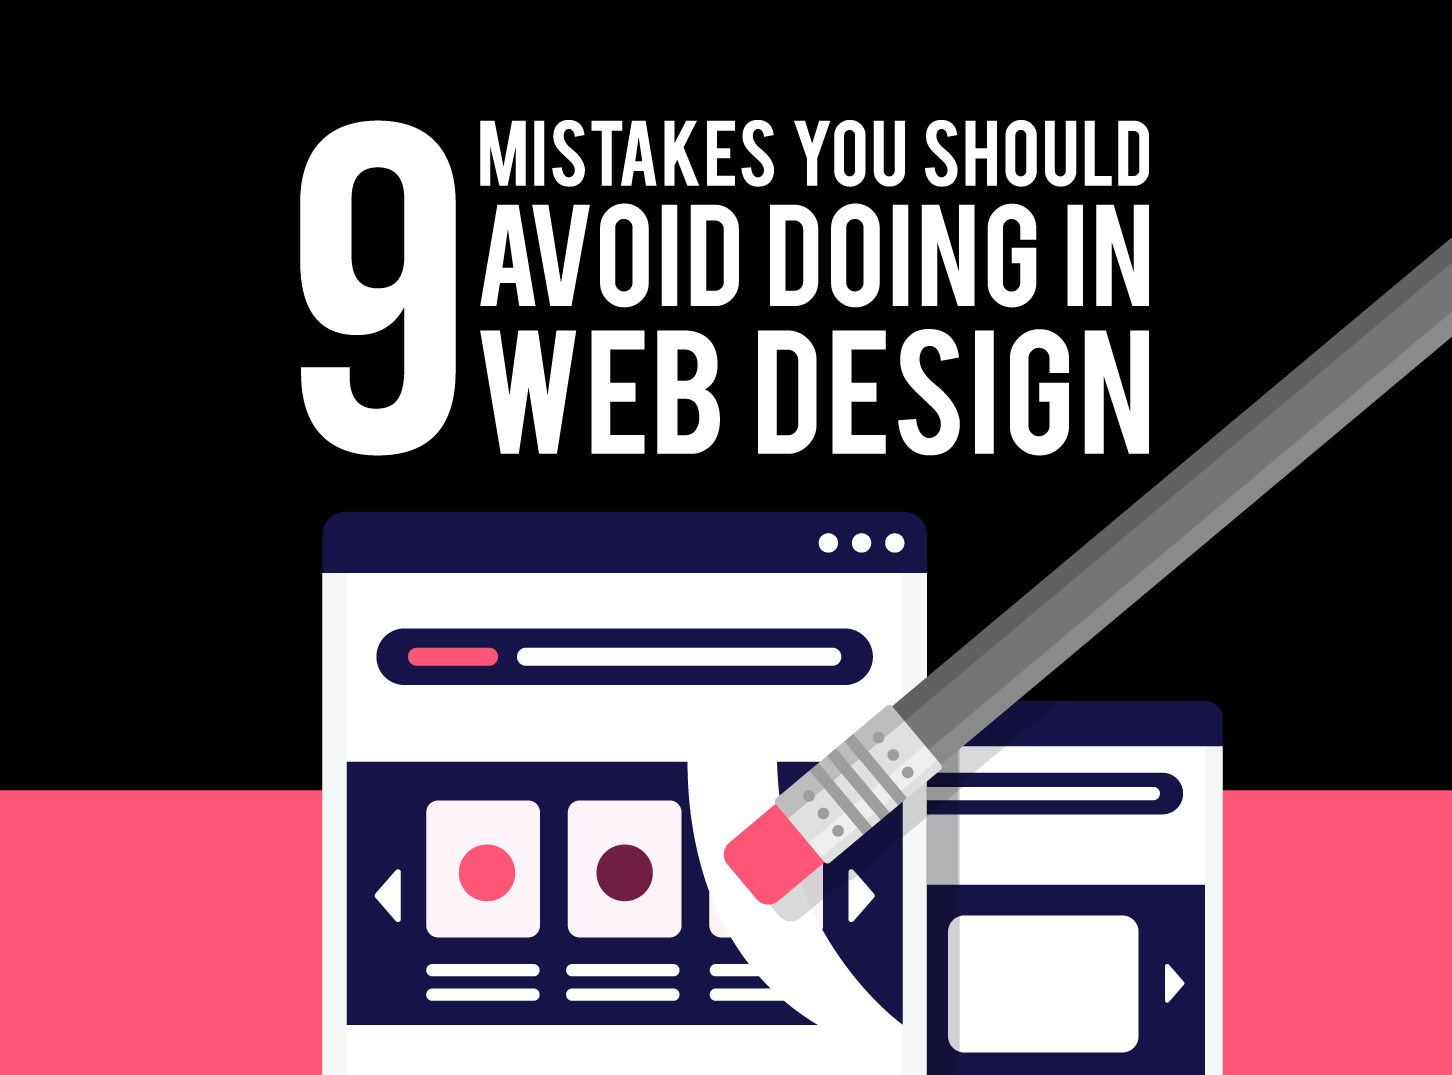 9 Mistakes that you should avoid doing in web design by Inkyy Web Design Studio